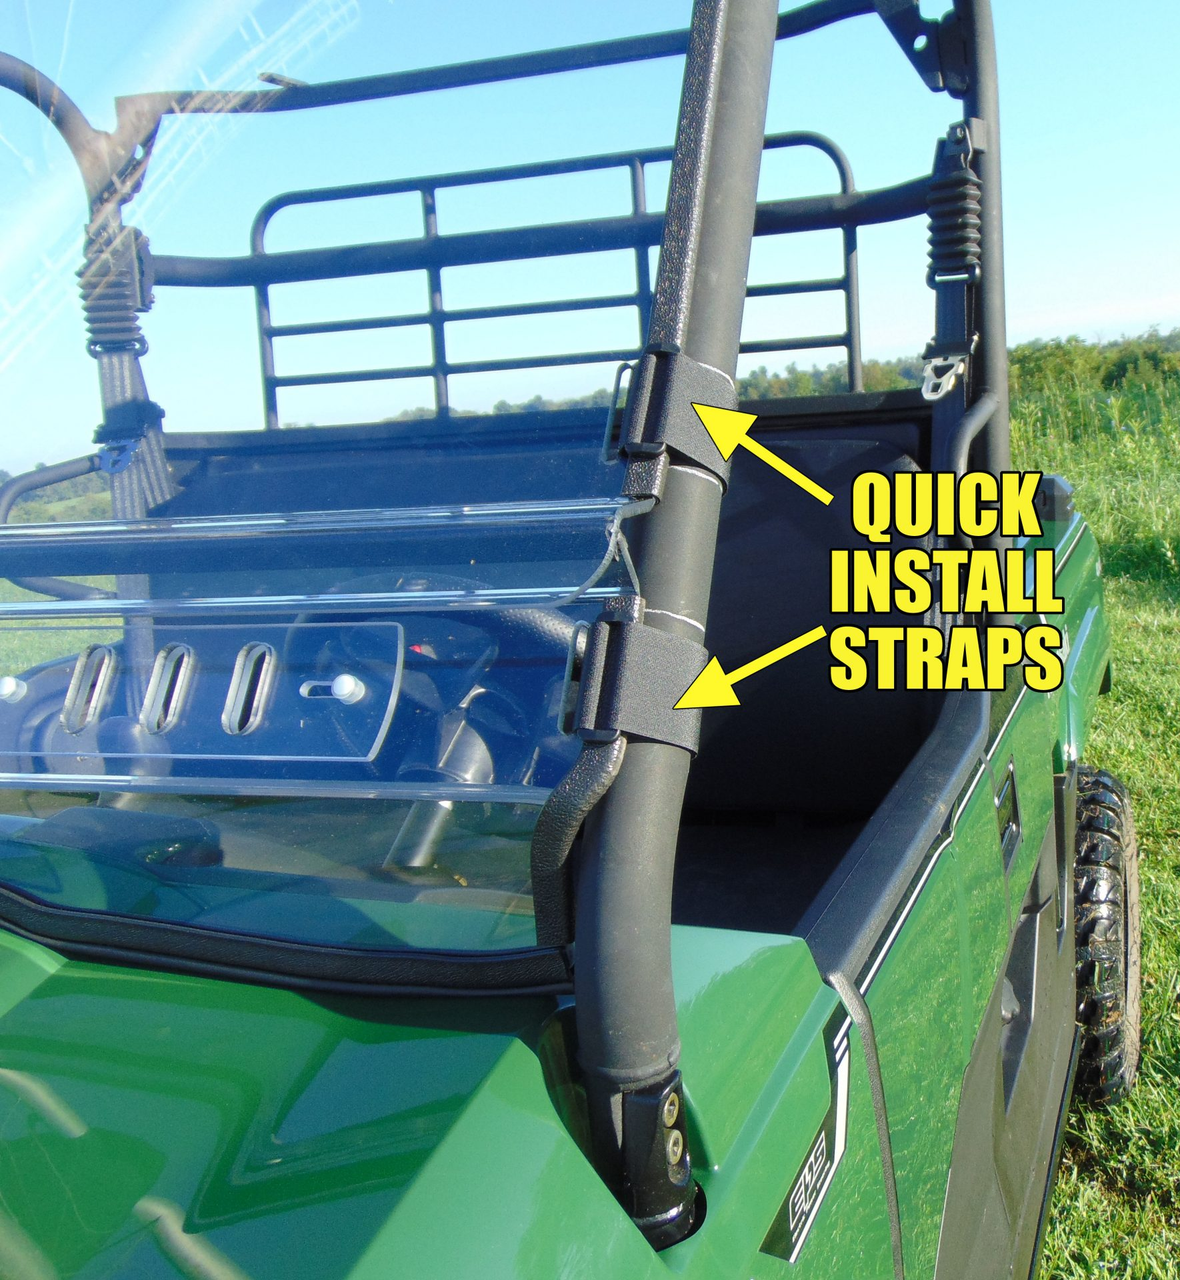 3 Star side x side CF Moto Z-Force 800 Trail 950 Sport and Trail half windshield quick install straps